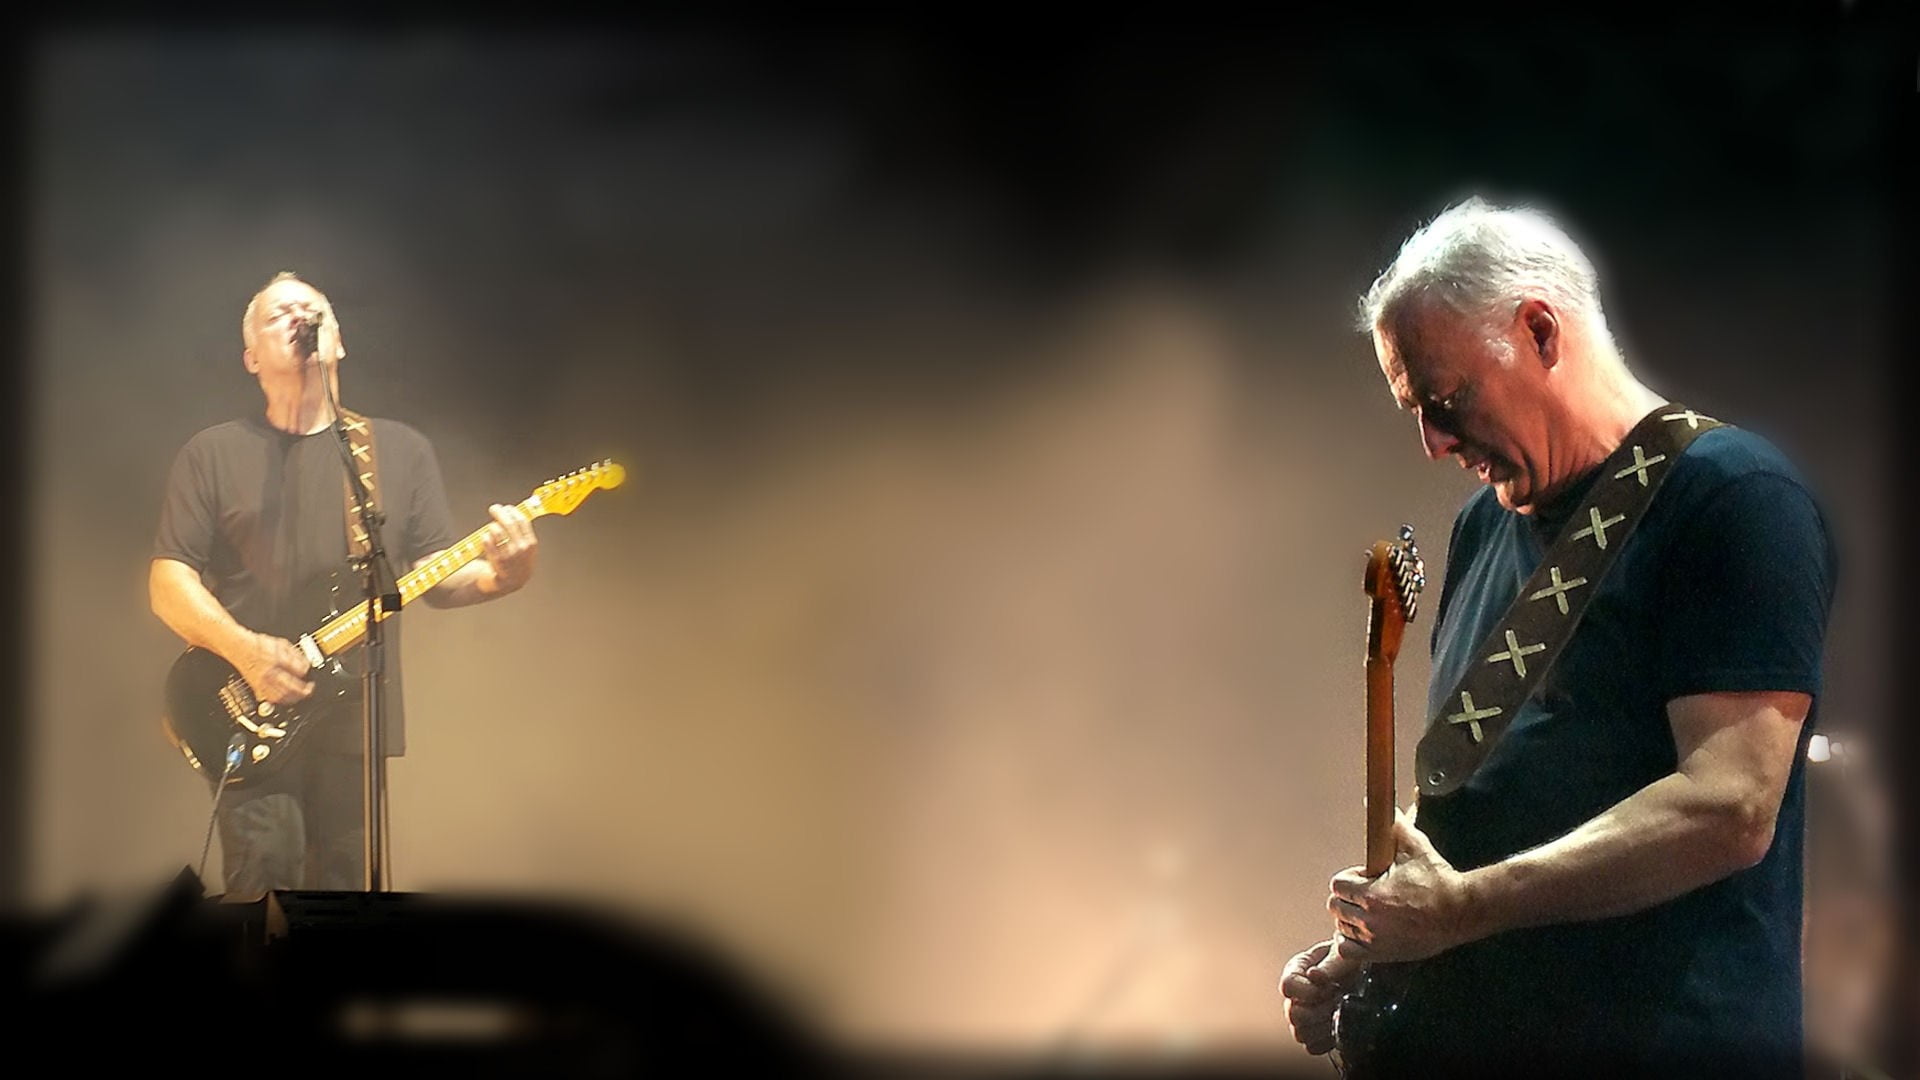 David gilmour, Guitar, Show, Microphone, Play, music, musical instrument